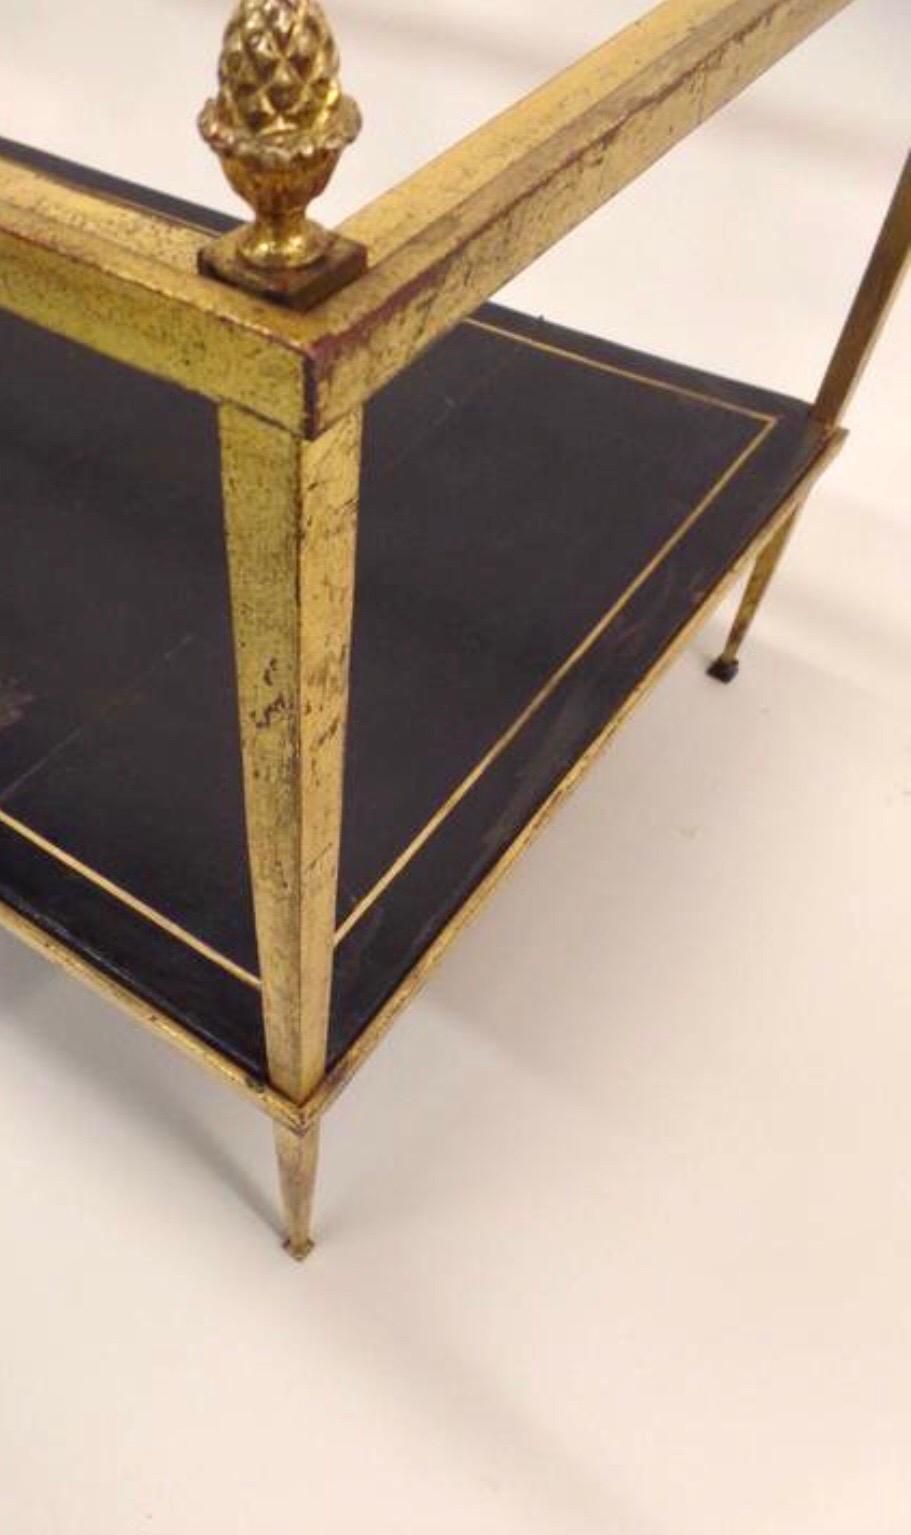 20th Century French Gilt Iron and Leather Modern Neoclassical Cocktail Table by Maison Ramsay For Sale